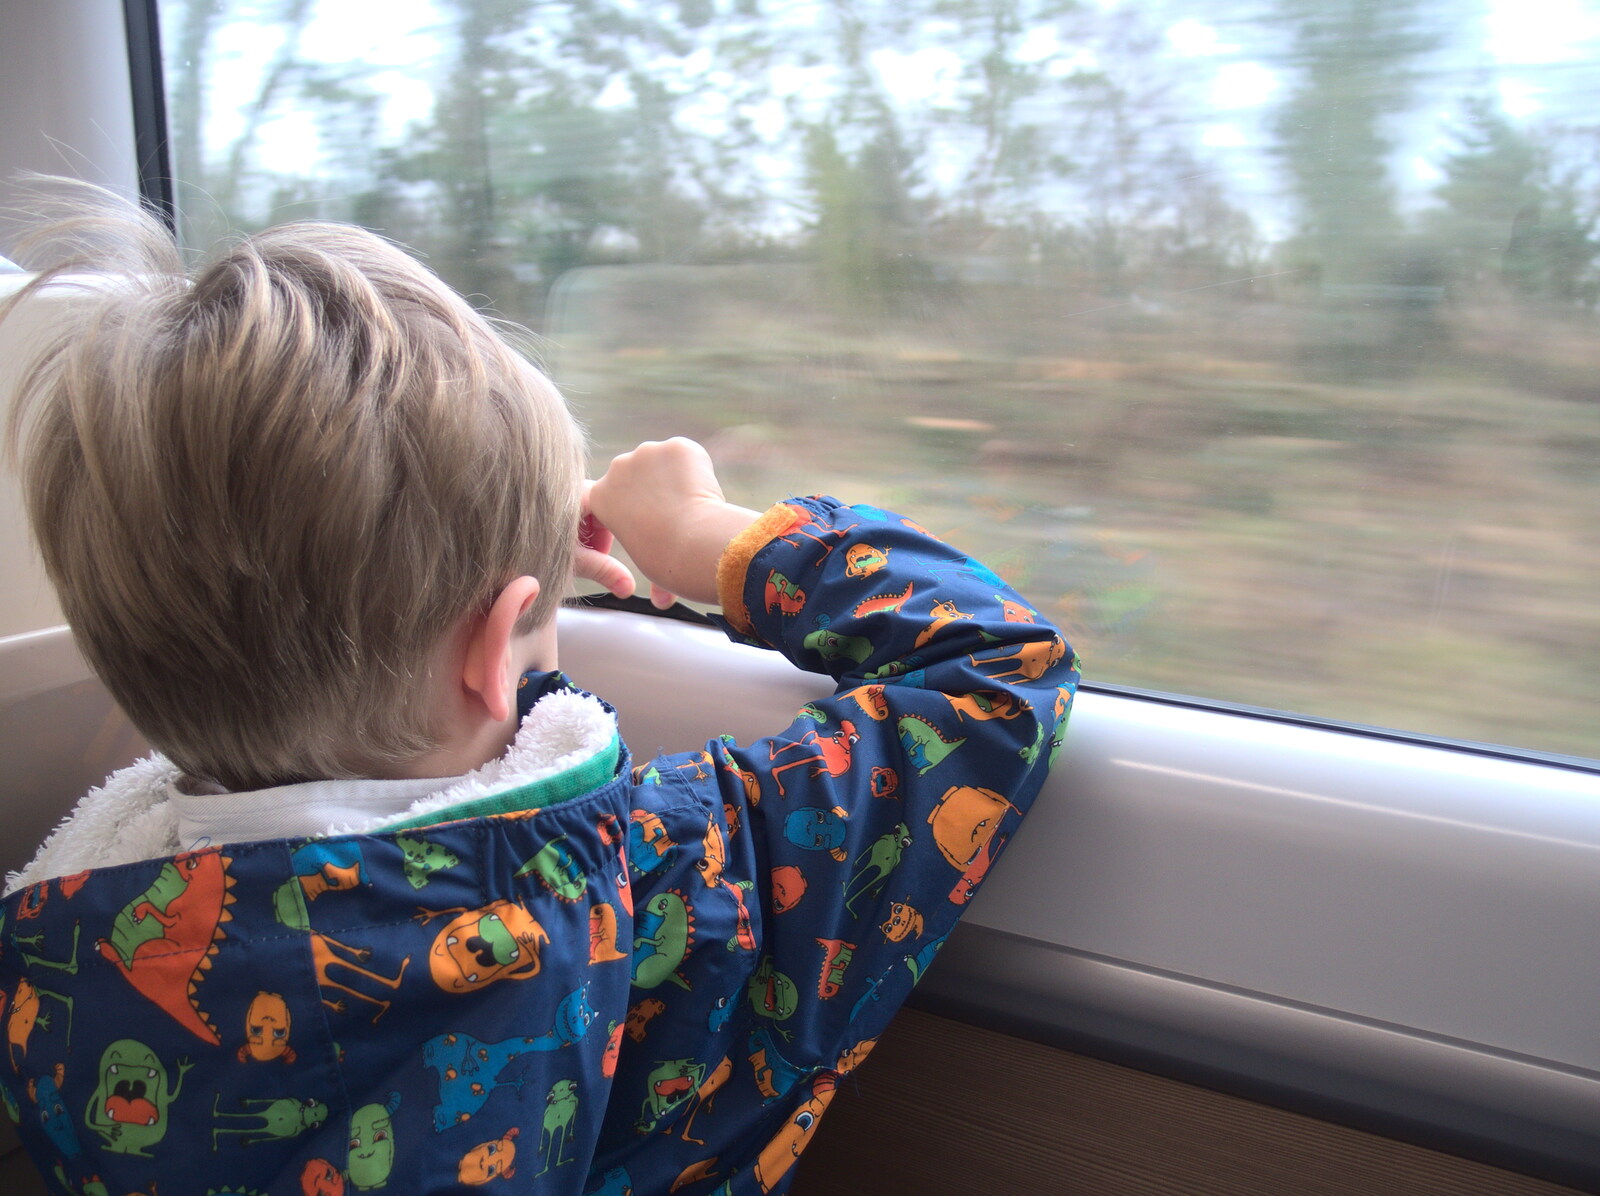 Harry on the train up to Norwich from Norwich Station and the Light Tunnel, Norwich, Norfolk  - 21st December 2016